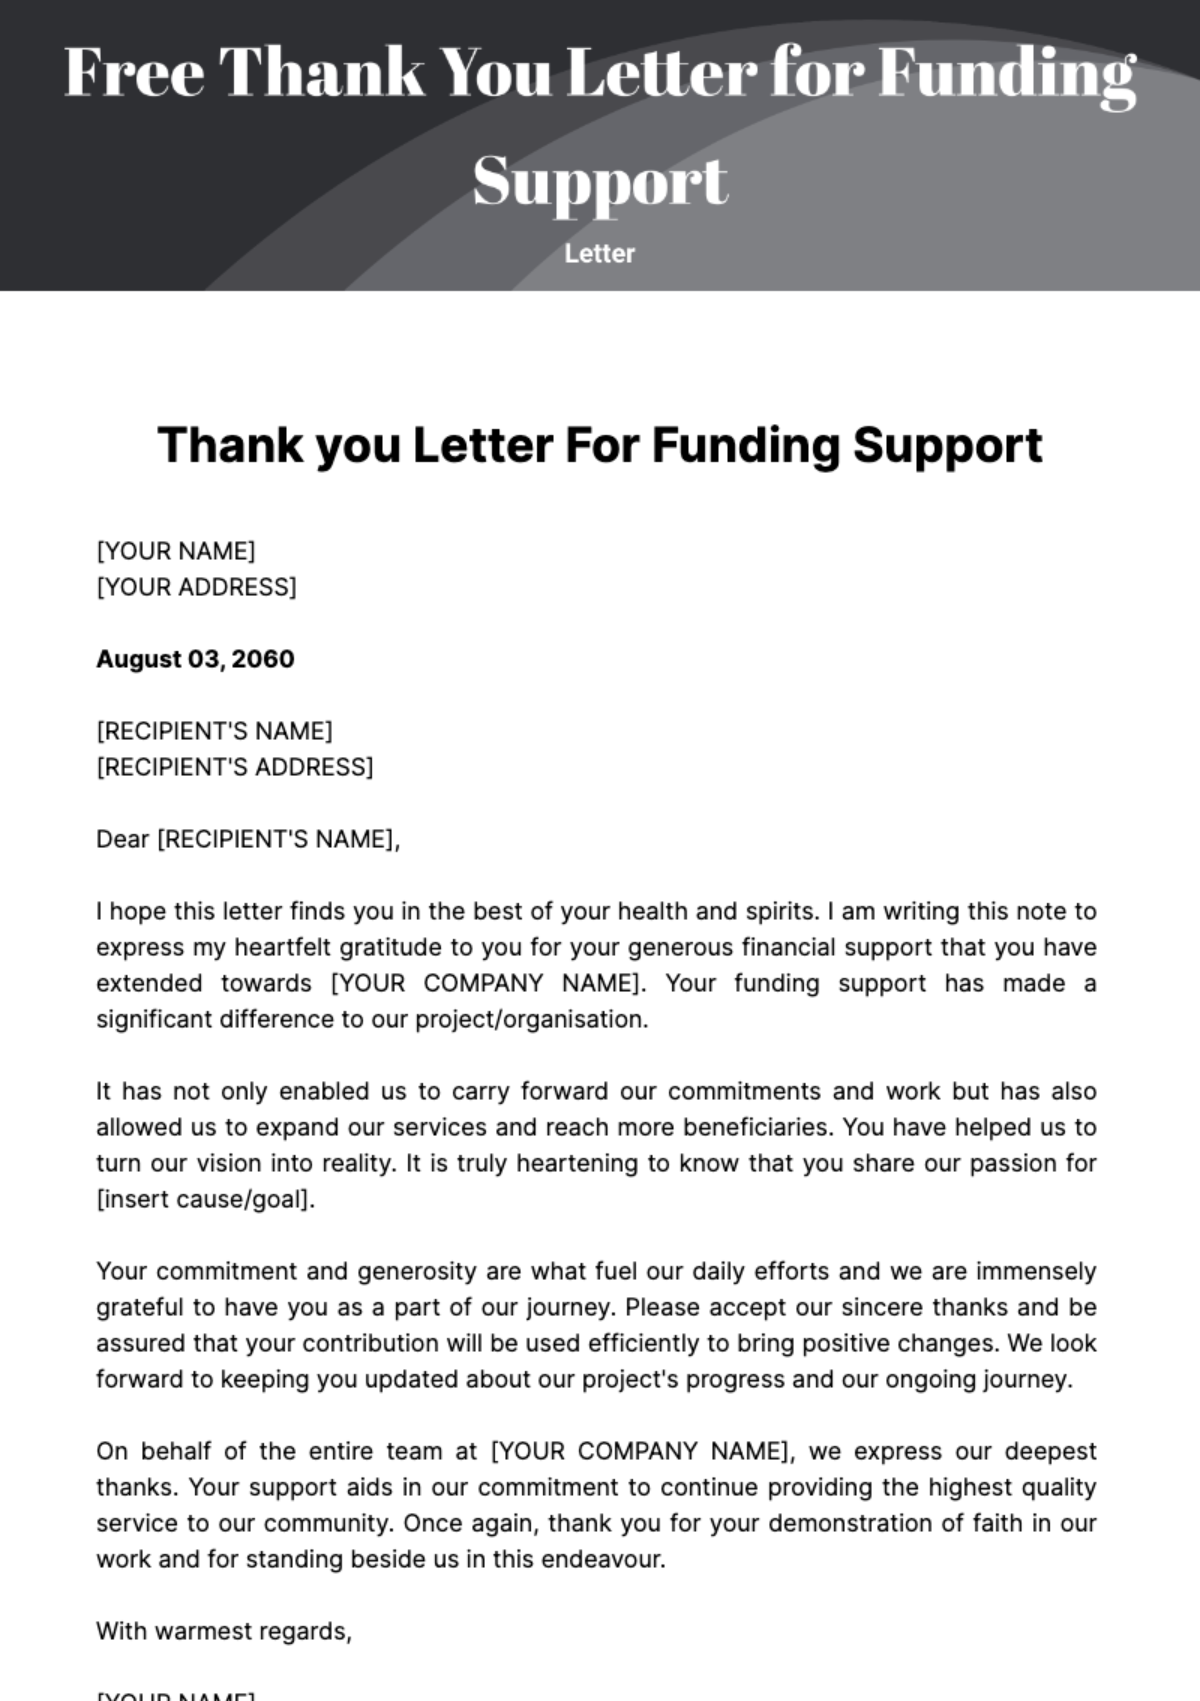 Thank you Letter for Funding Support Template